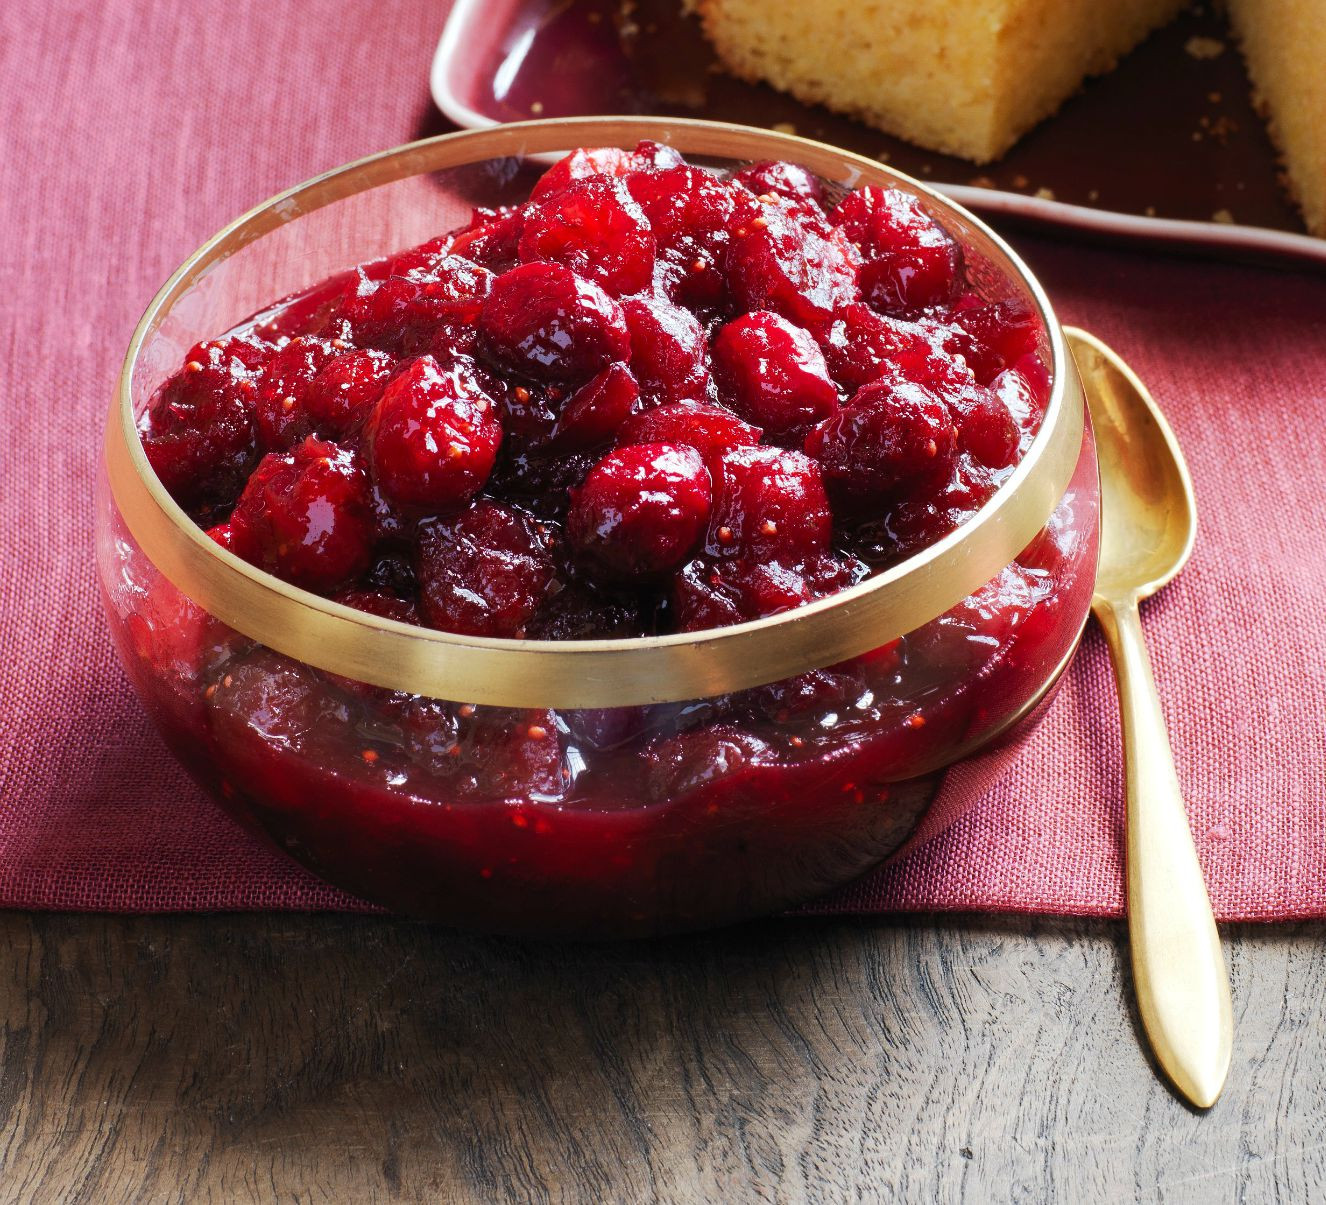 Cranberry Relish Recipes Thanksgiving
 25 Best Cranberry Sauce Recipes How To Make Homemade